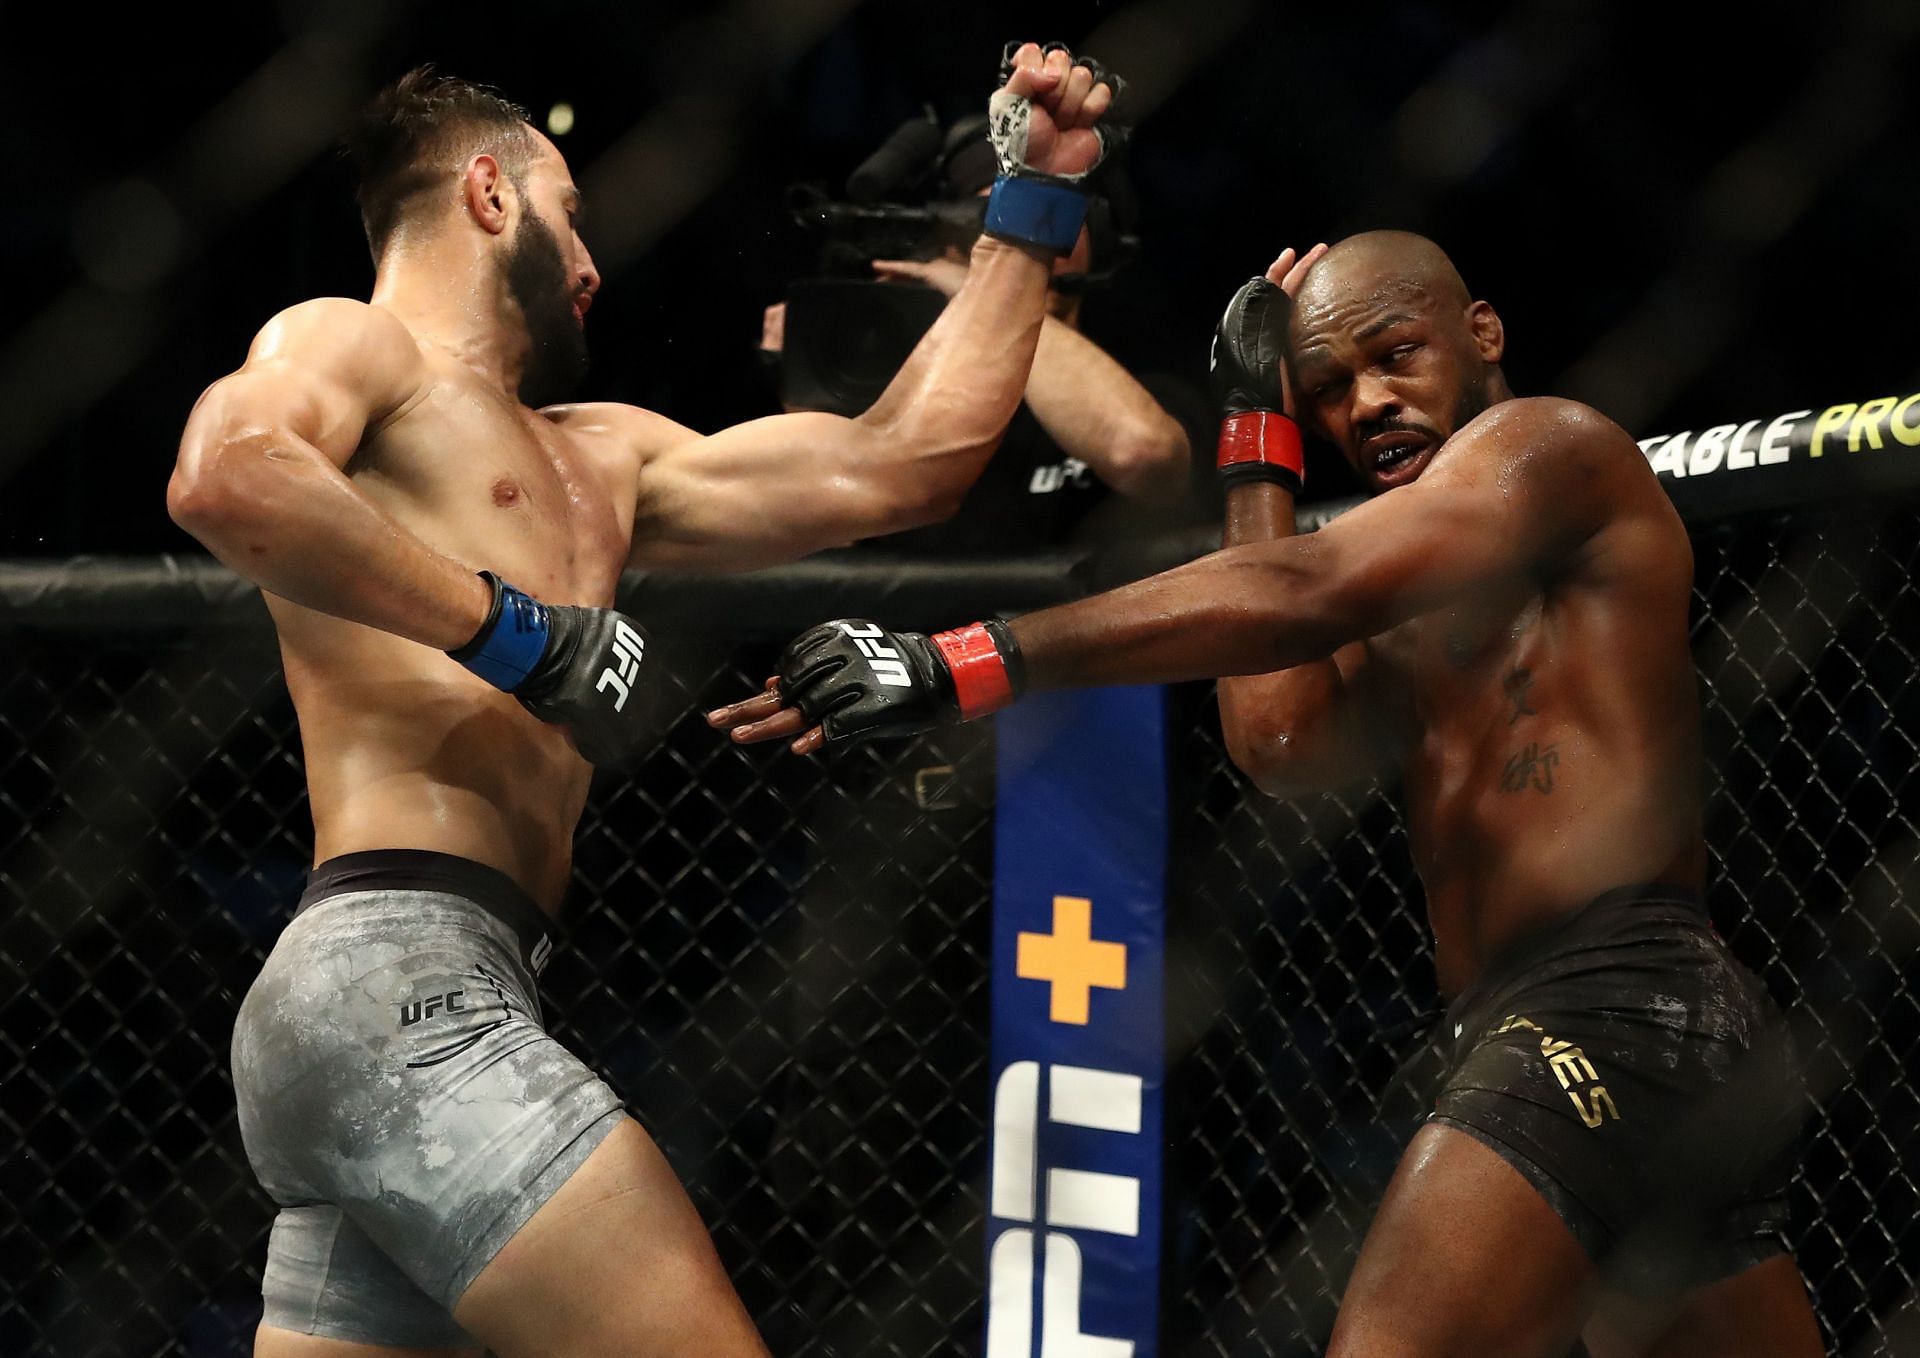 Can Jon Jones&#039; chin withstand a shot from one of the UFC&#039;s top heavyweights?